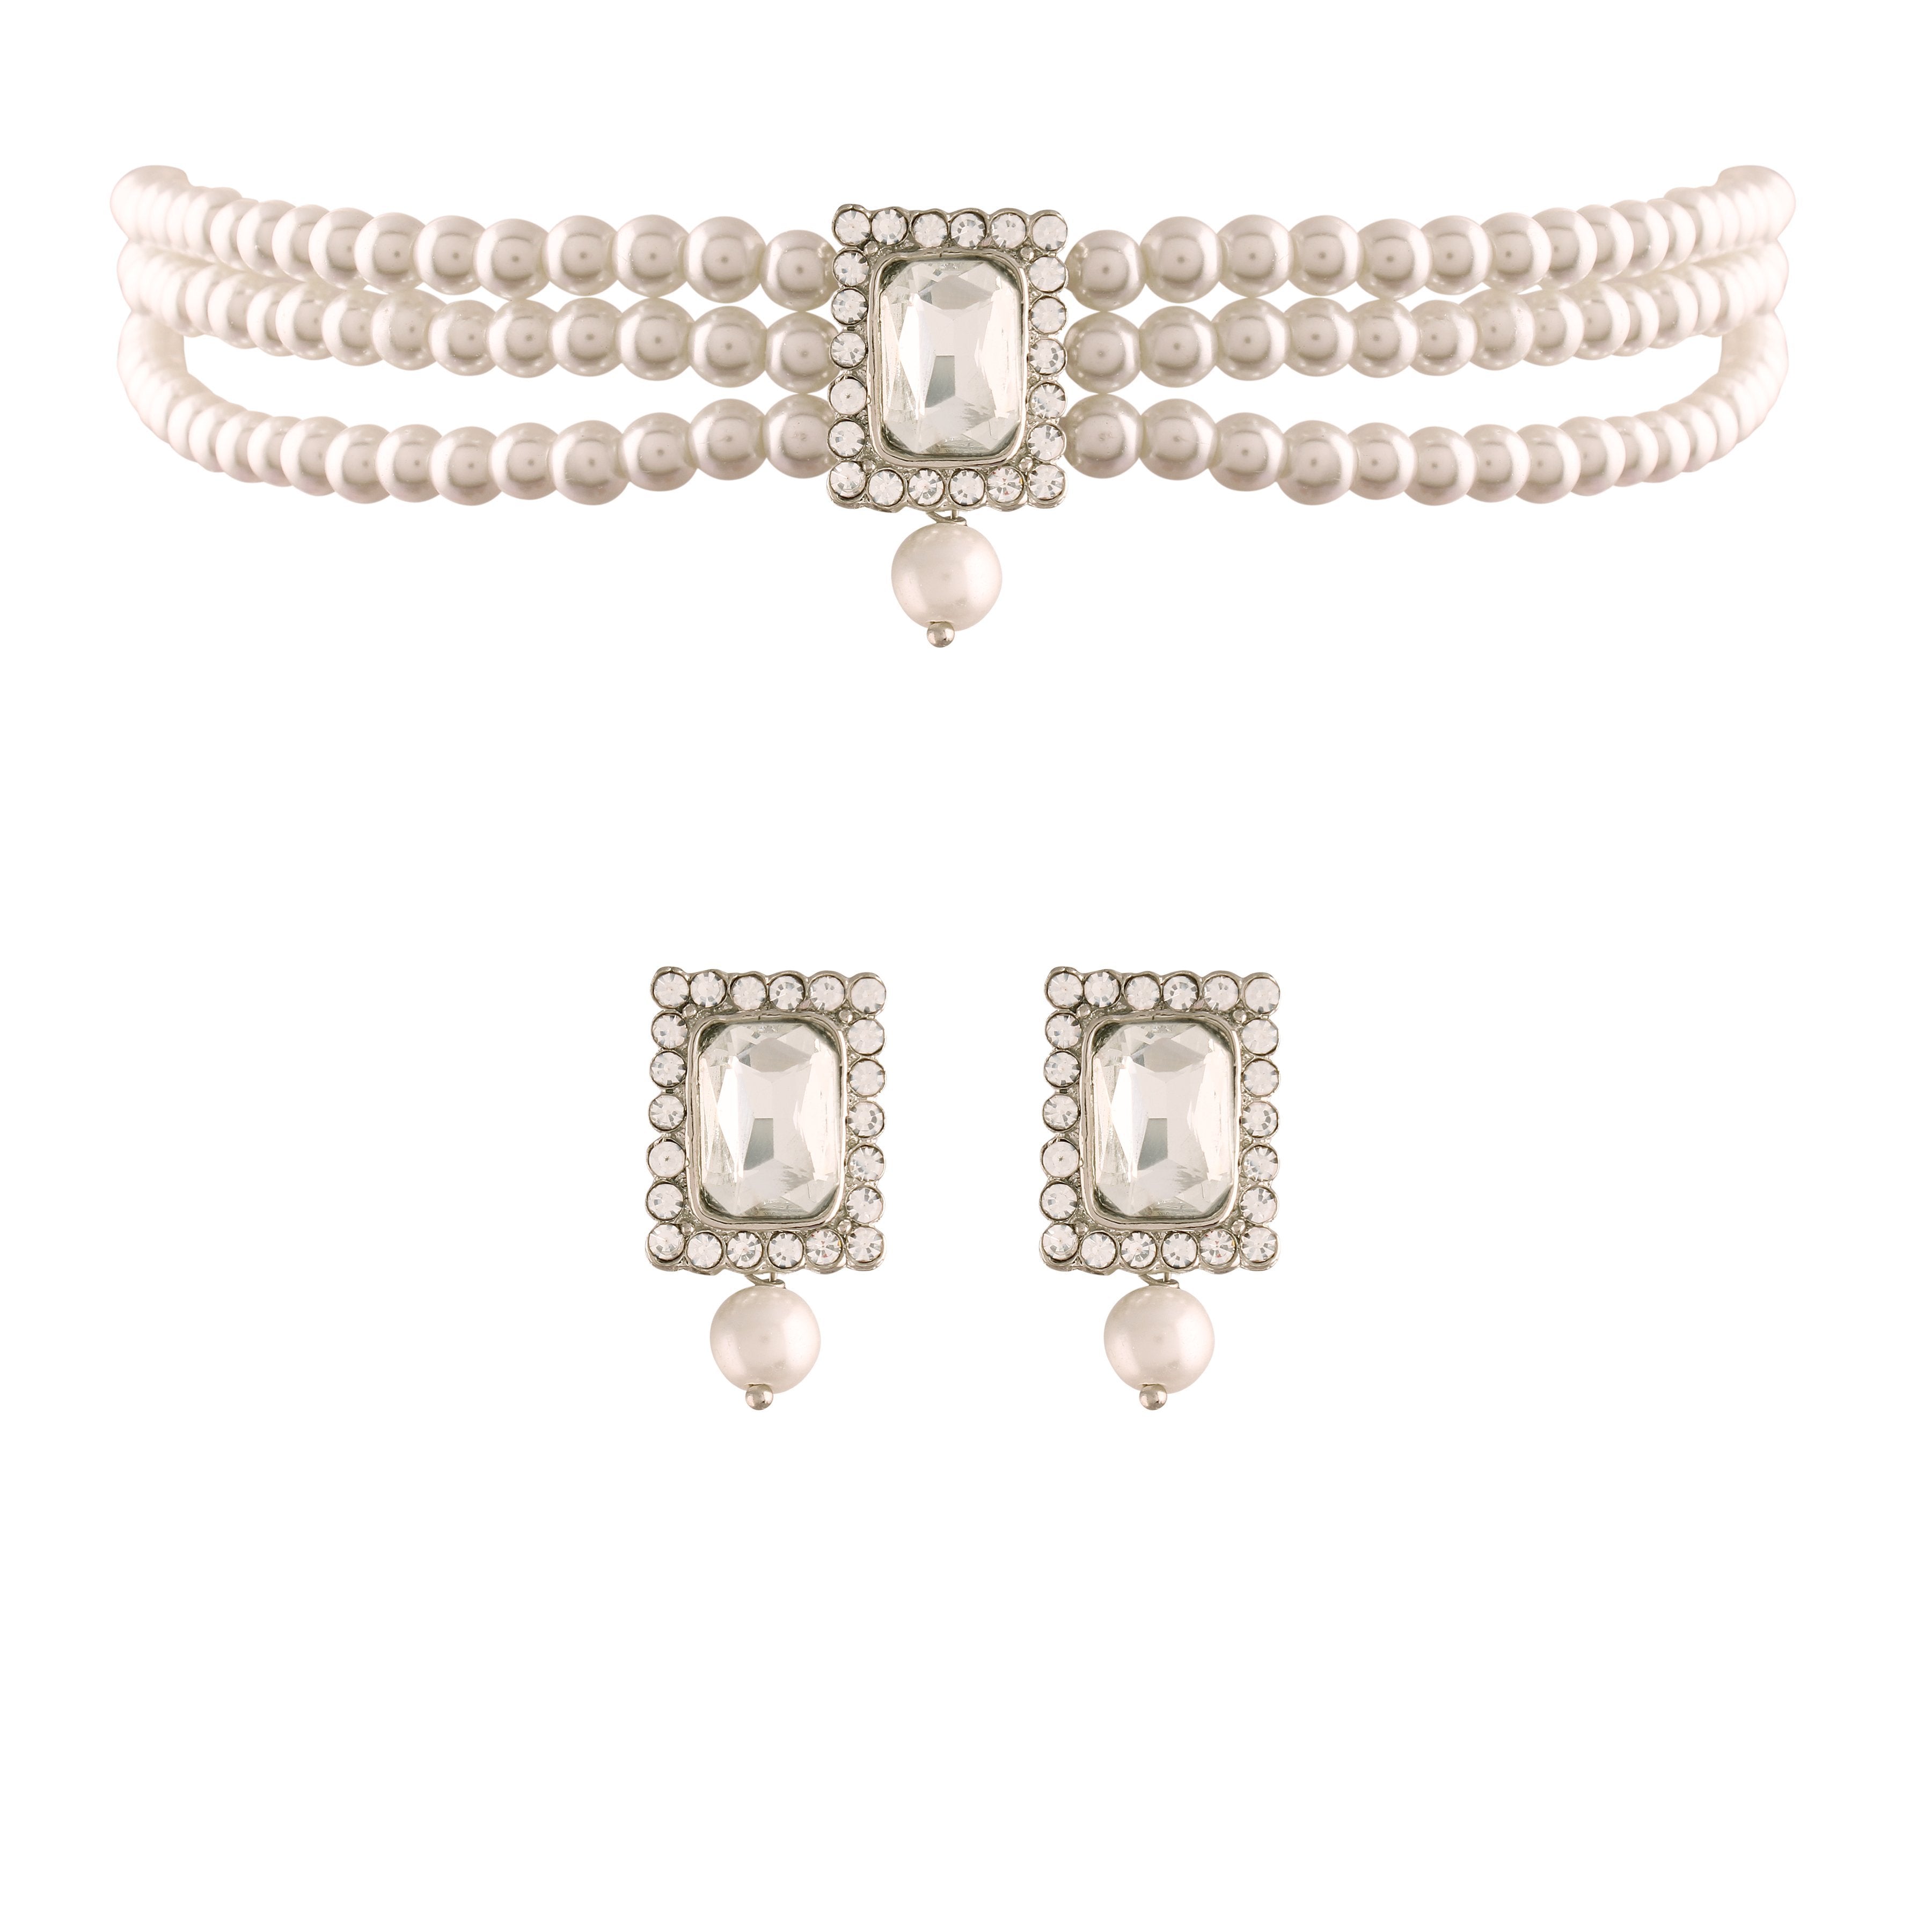 Women's  Rhodium Plated White Stone & Pearl Beaded Choker Set With Earrings For Women  - i jewels